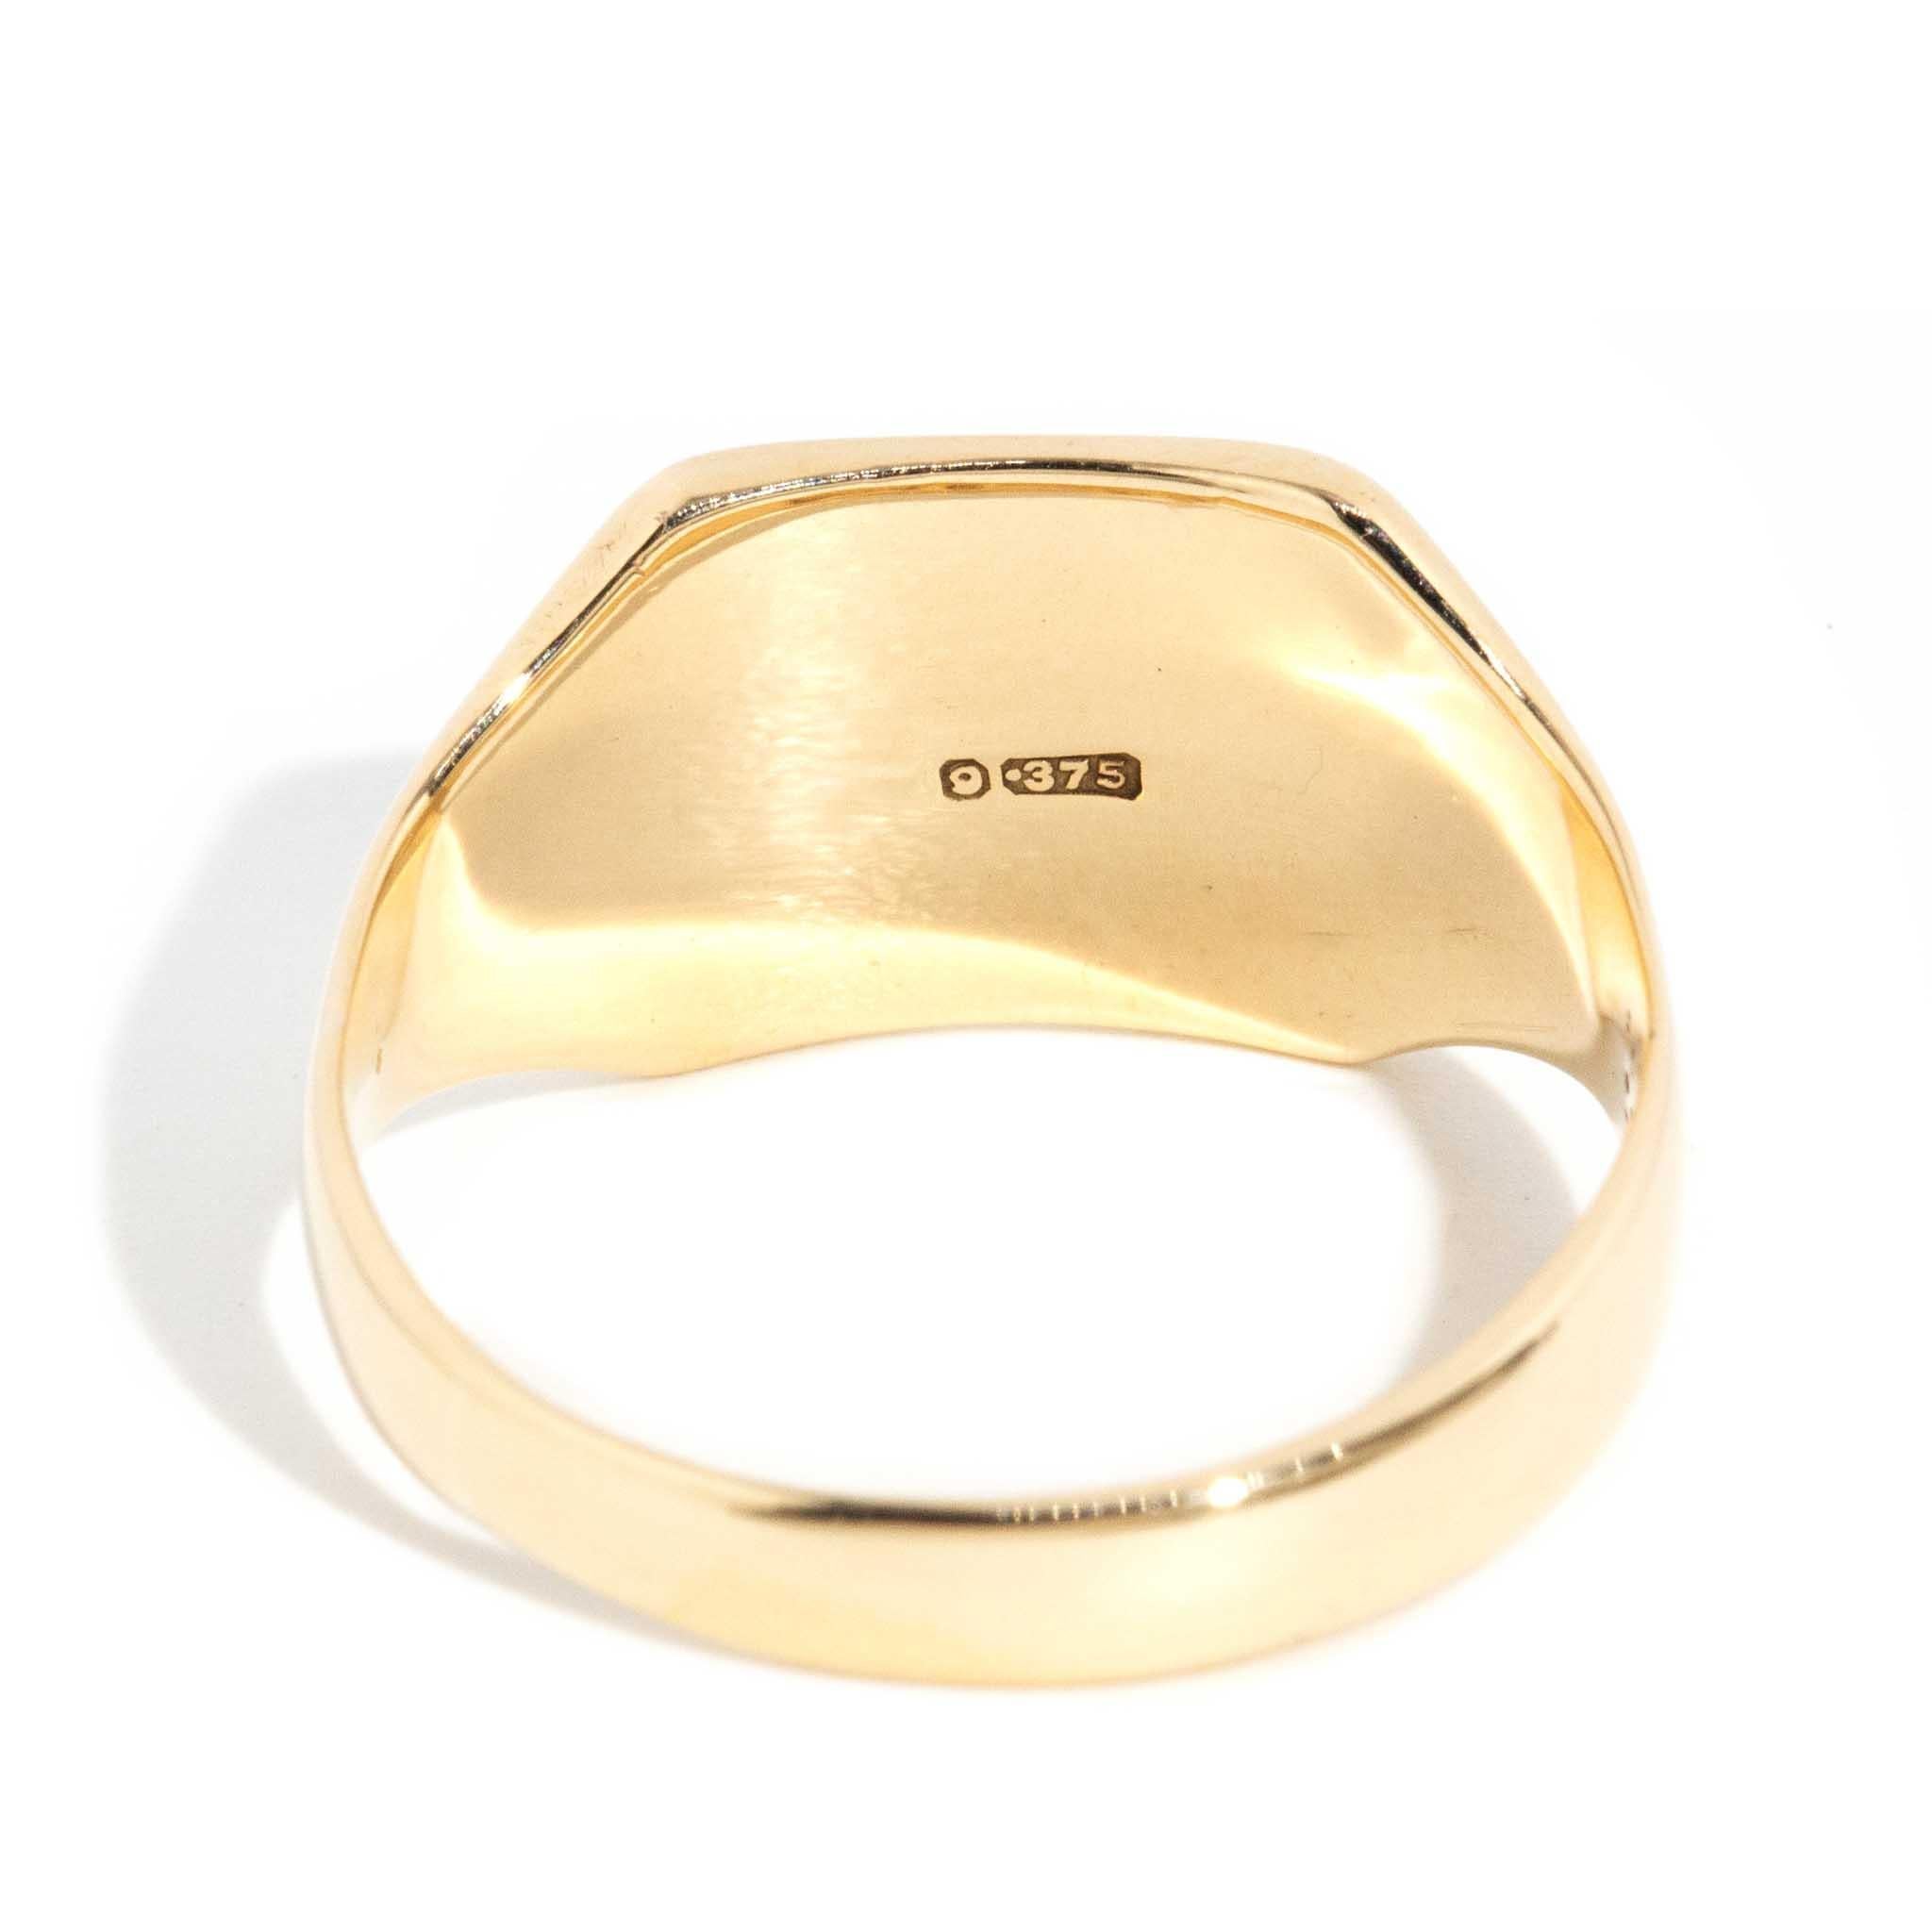 Vintage 1935 Hallmarked & Initialed Unisex Signet Ring 9 Carat Yellow Gold For Sale 1